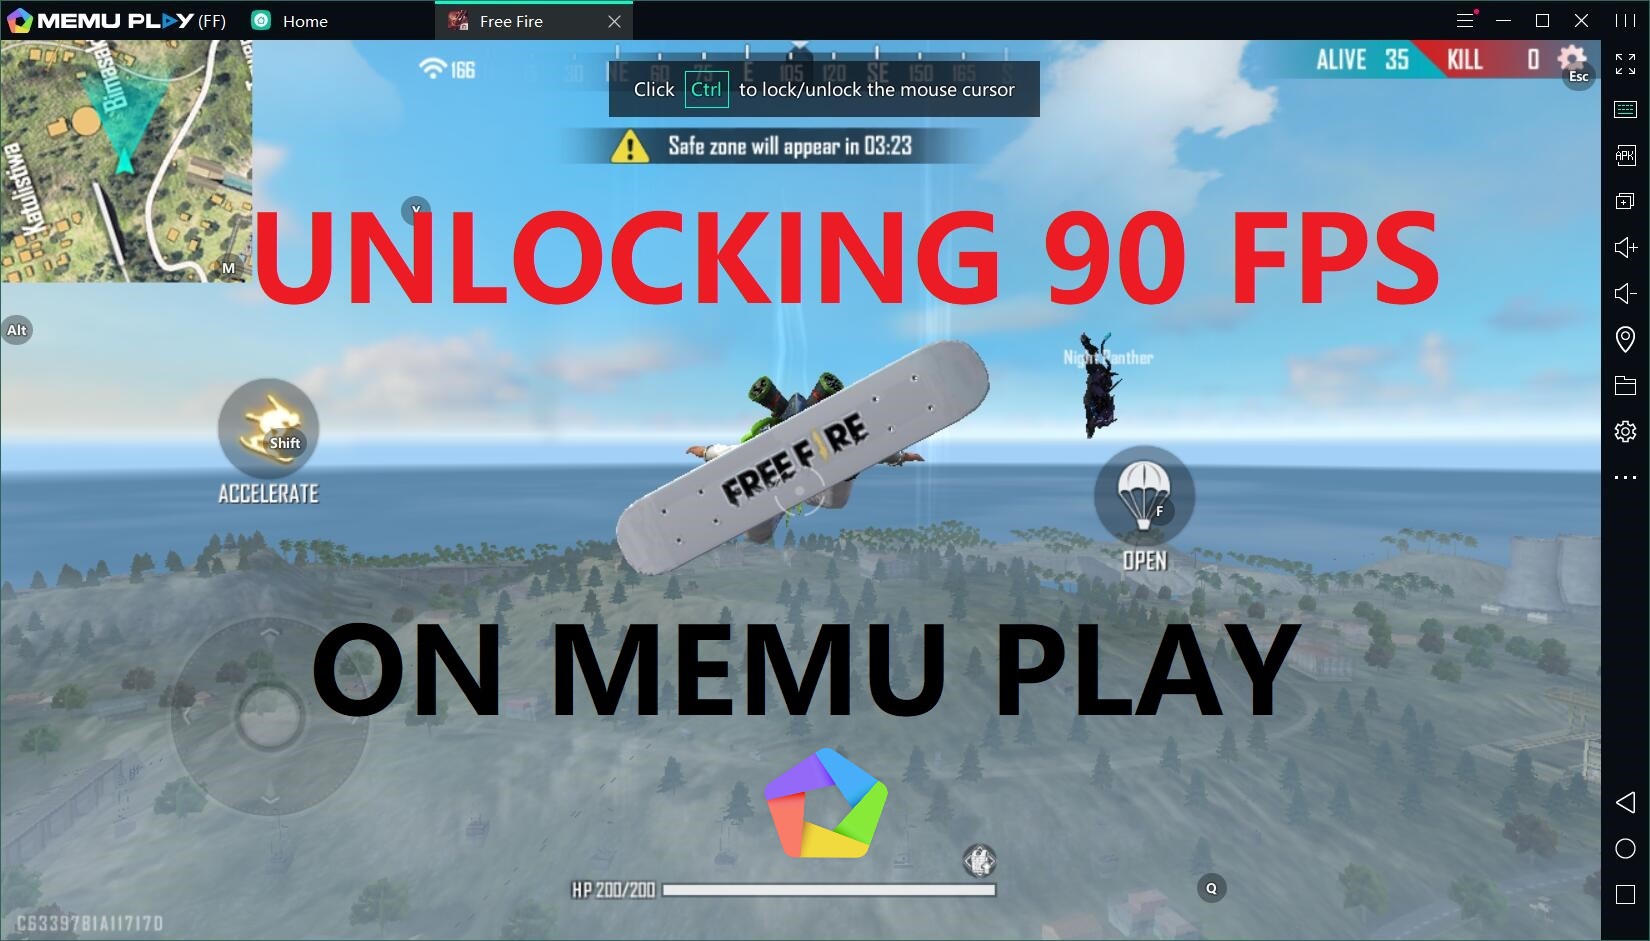 Play Free Fire On Pc With 90 Fps Memu Exclusive Memu Blog